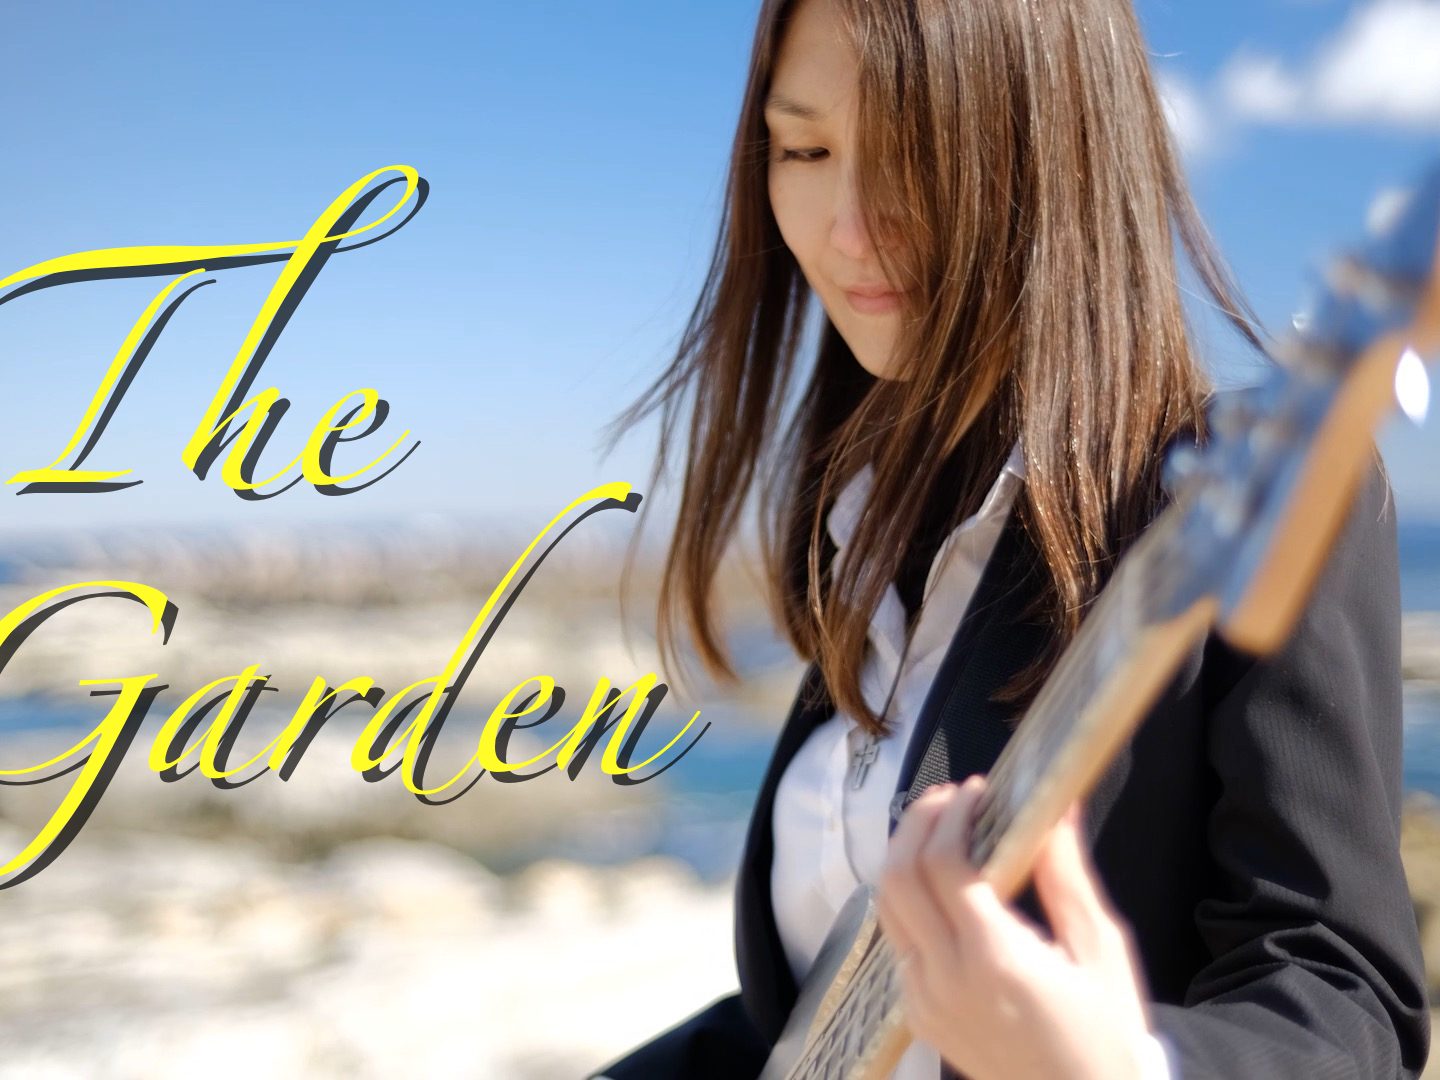 “The Garden” music video released